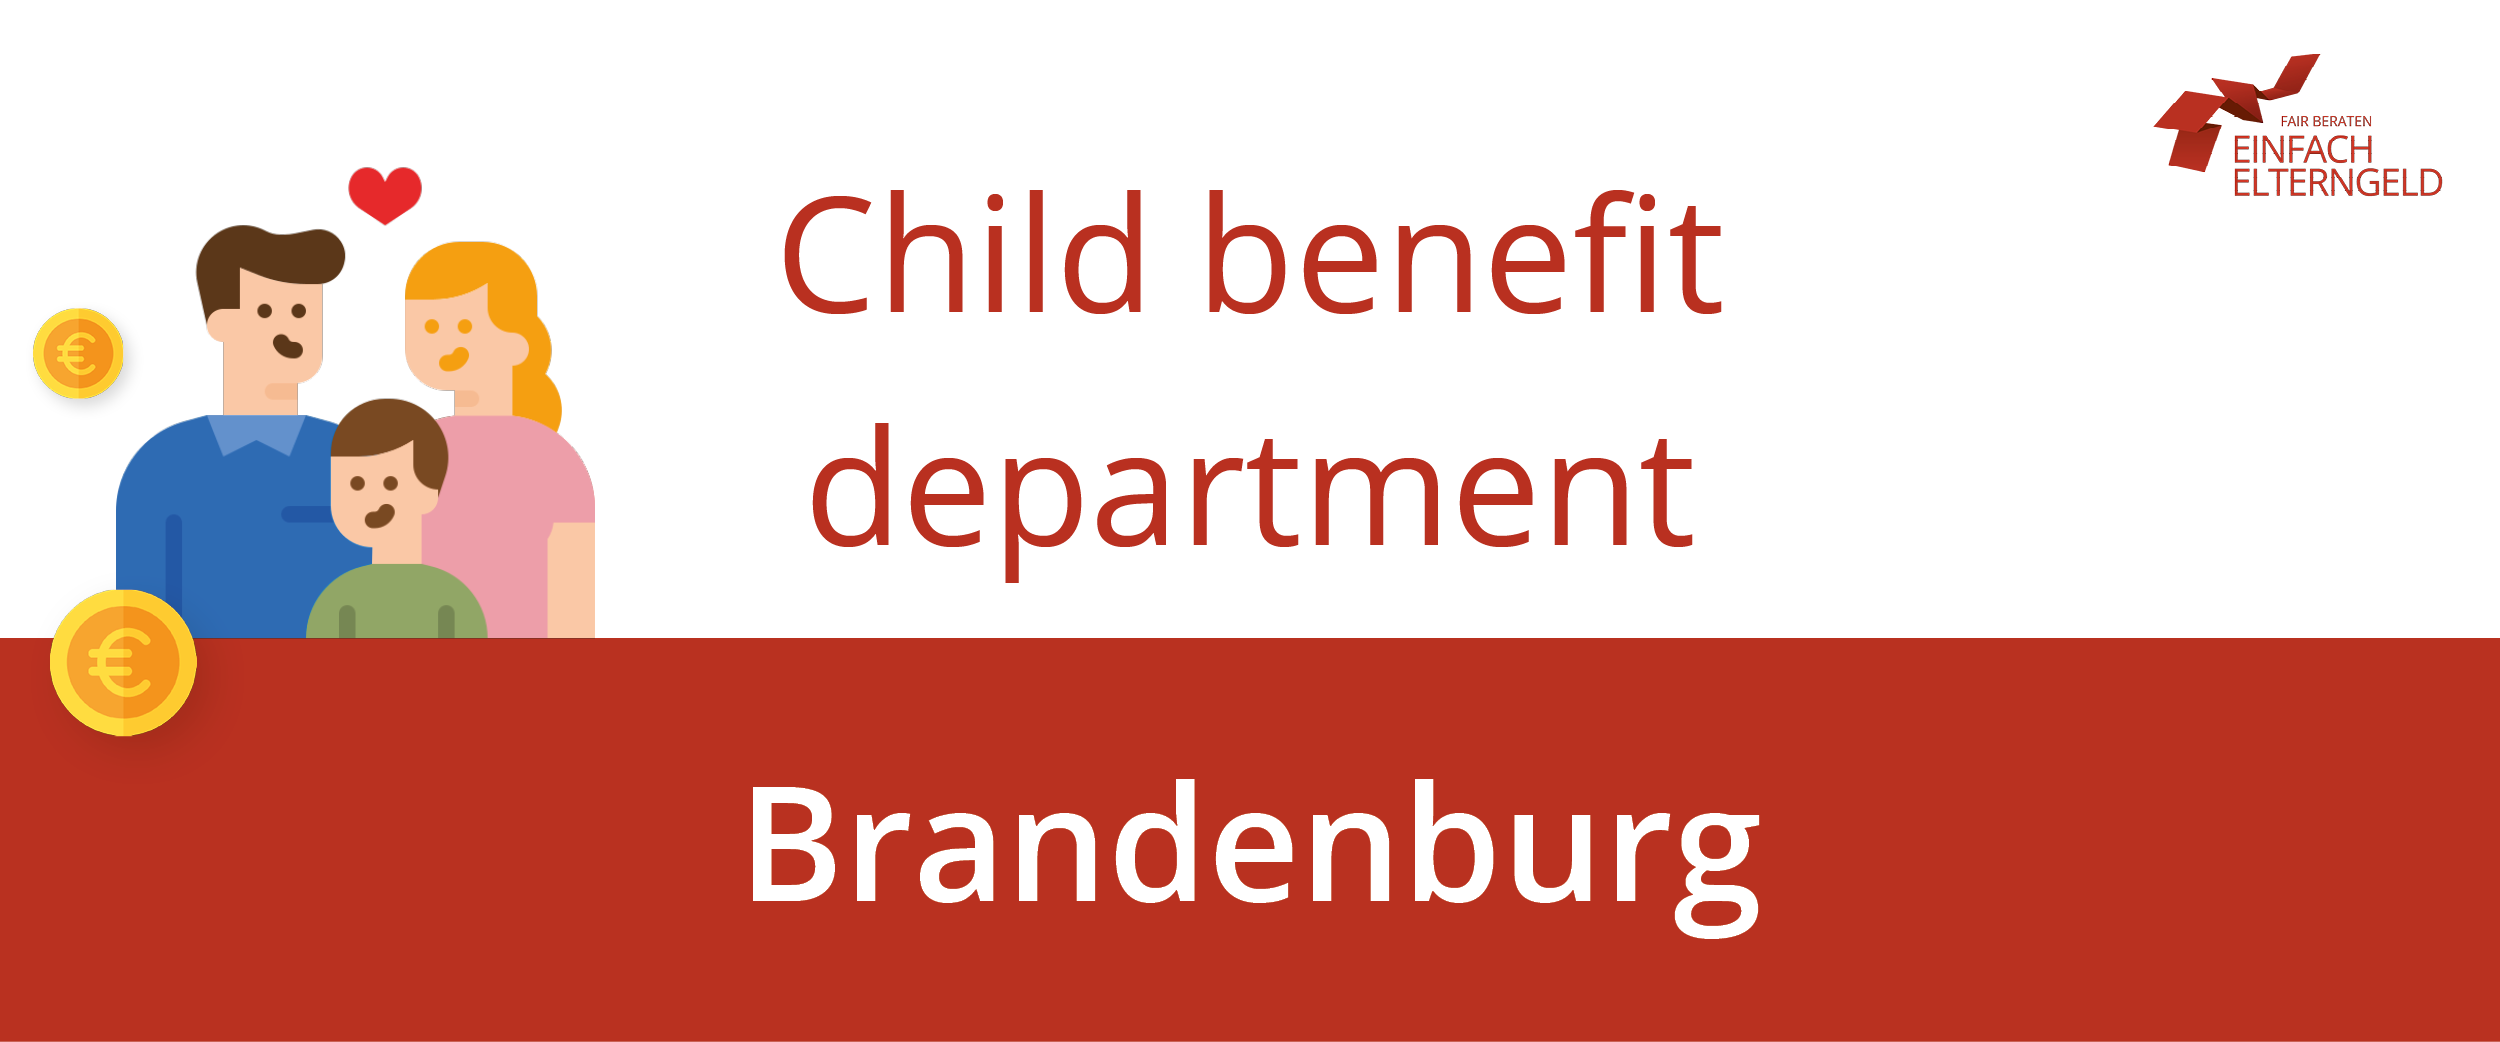 We introduce you to the child benefit department of Brandenburg.